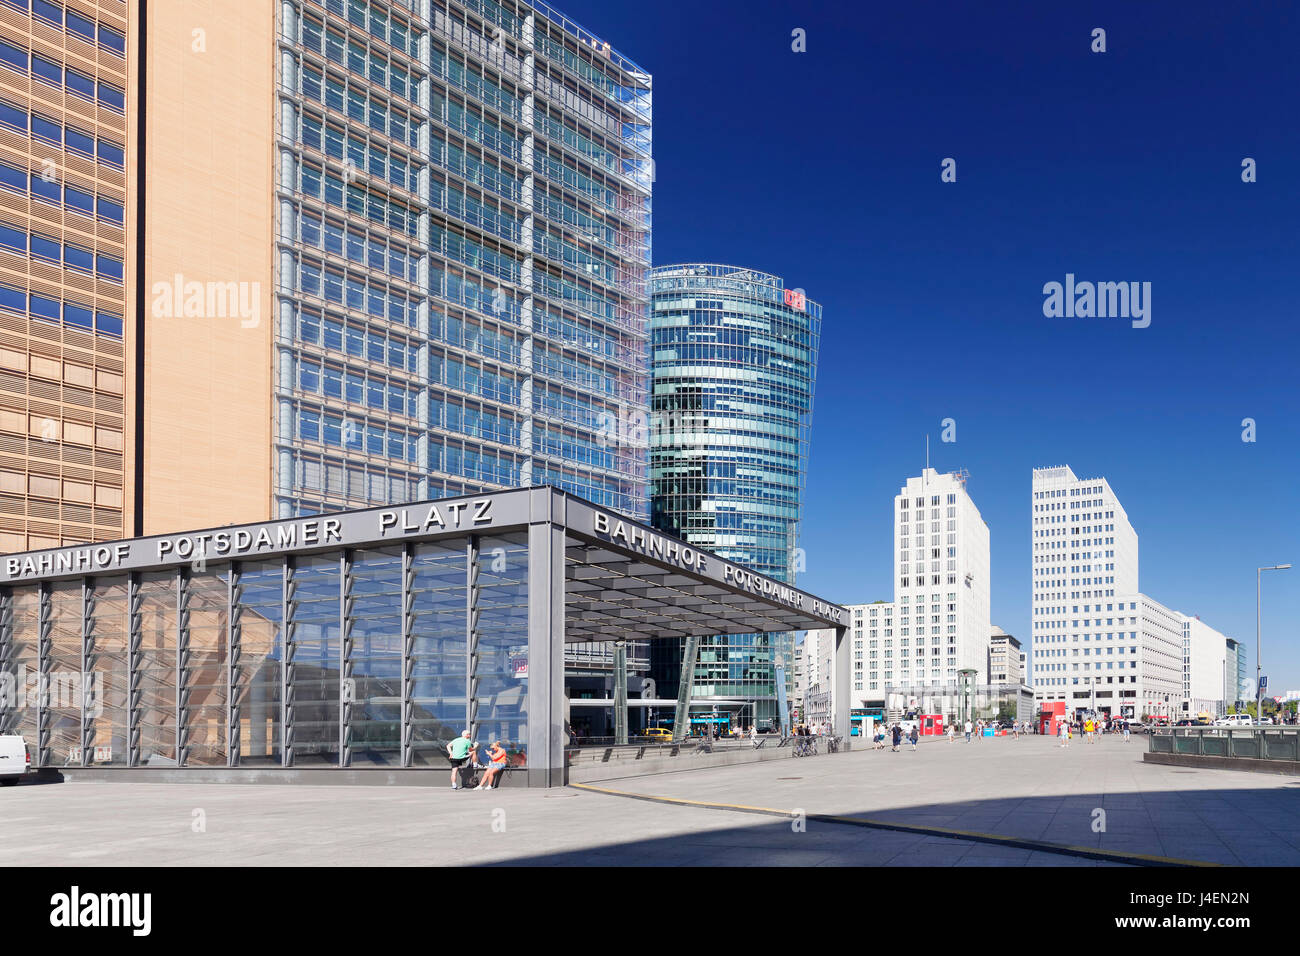 Potsdamer Platz Square with DB Tower, Berlin Mitte, Berlin, Germany, Europe Stock Photo